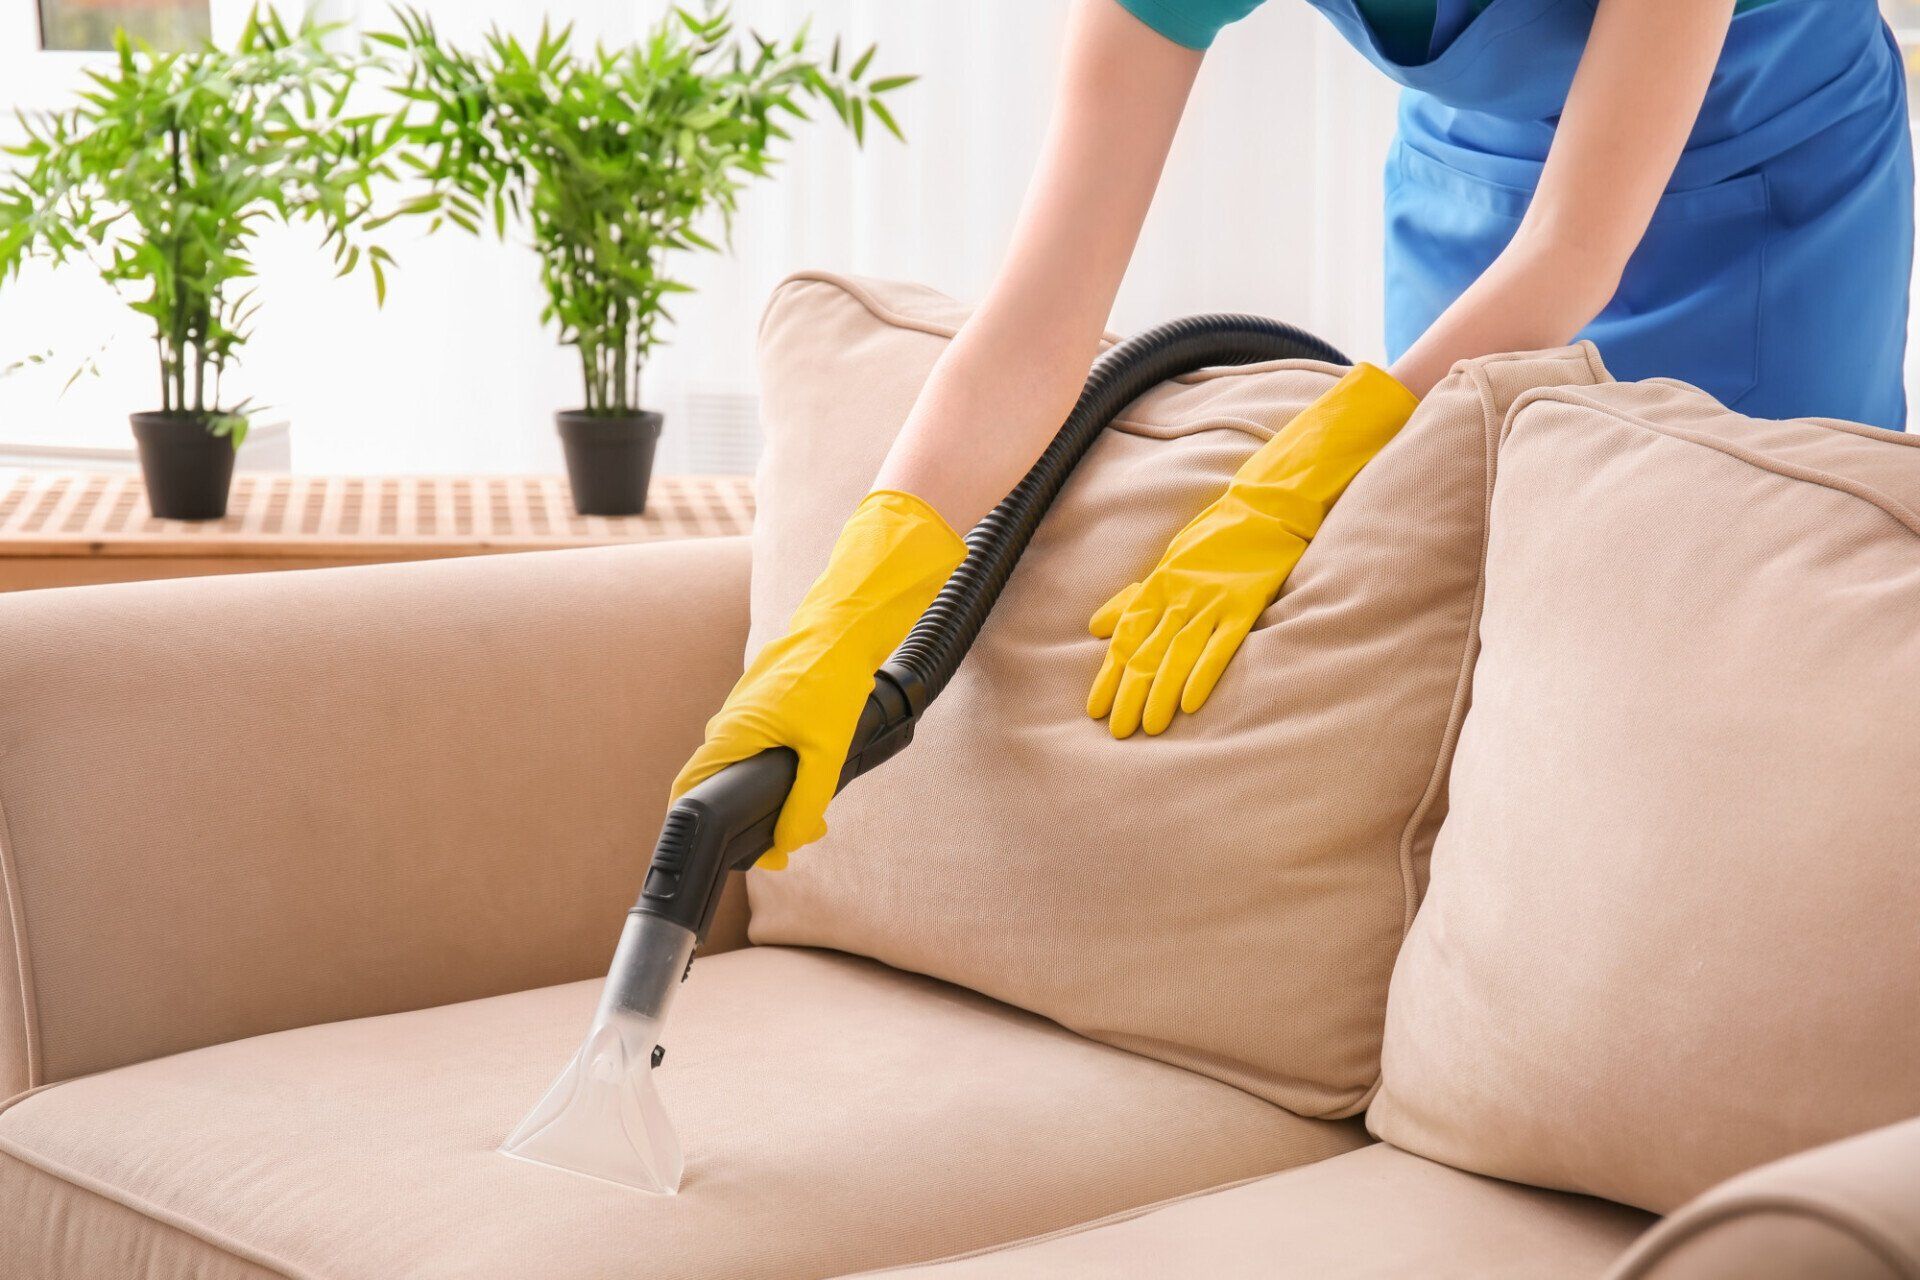 Efficiently using a vacuum cleaner to clean and refresh a couch at home.